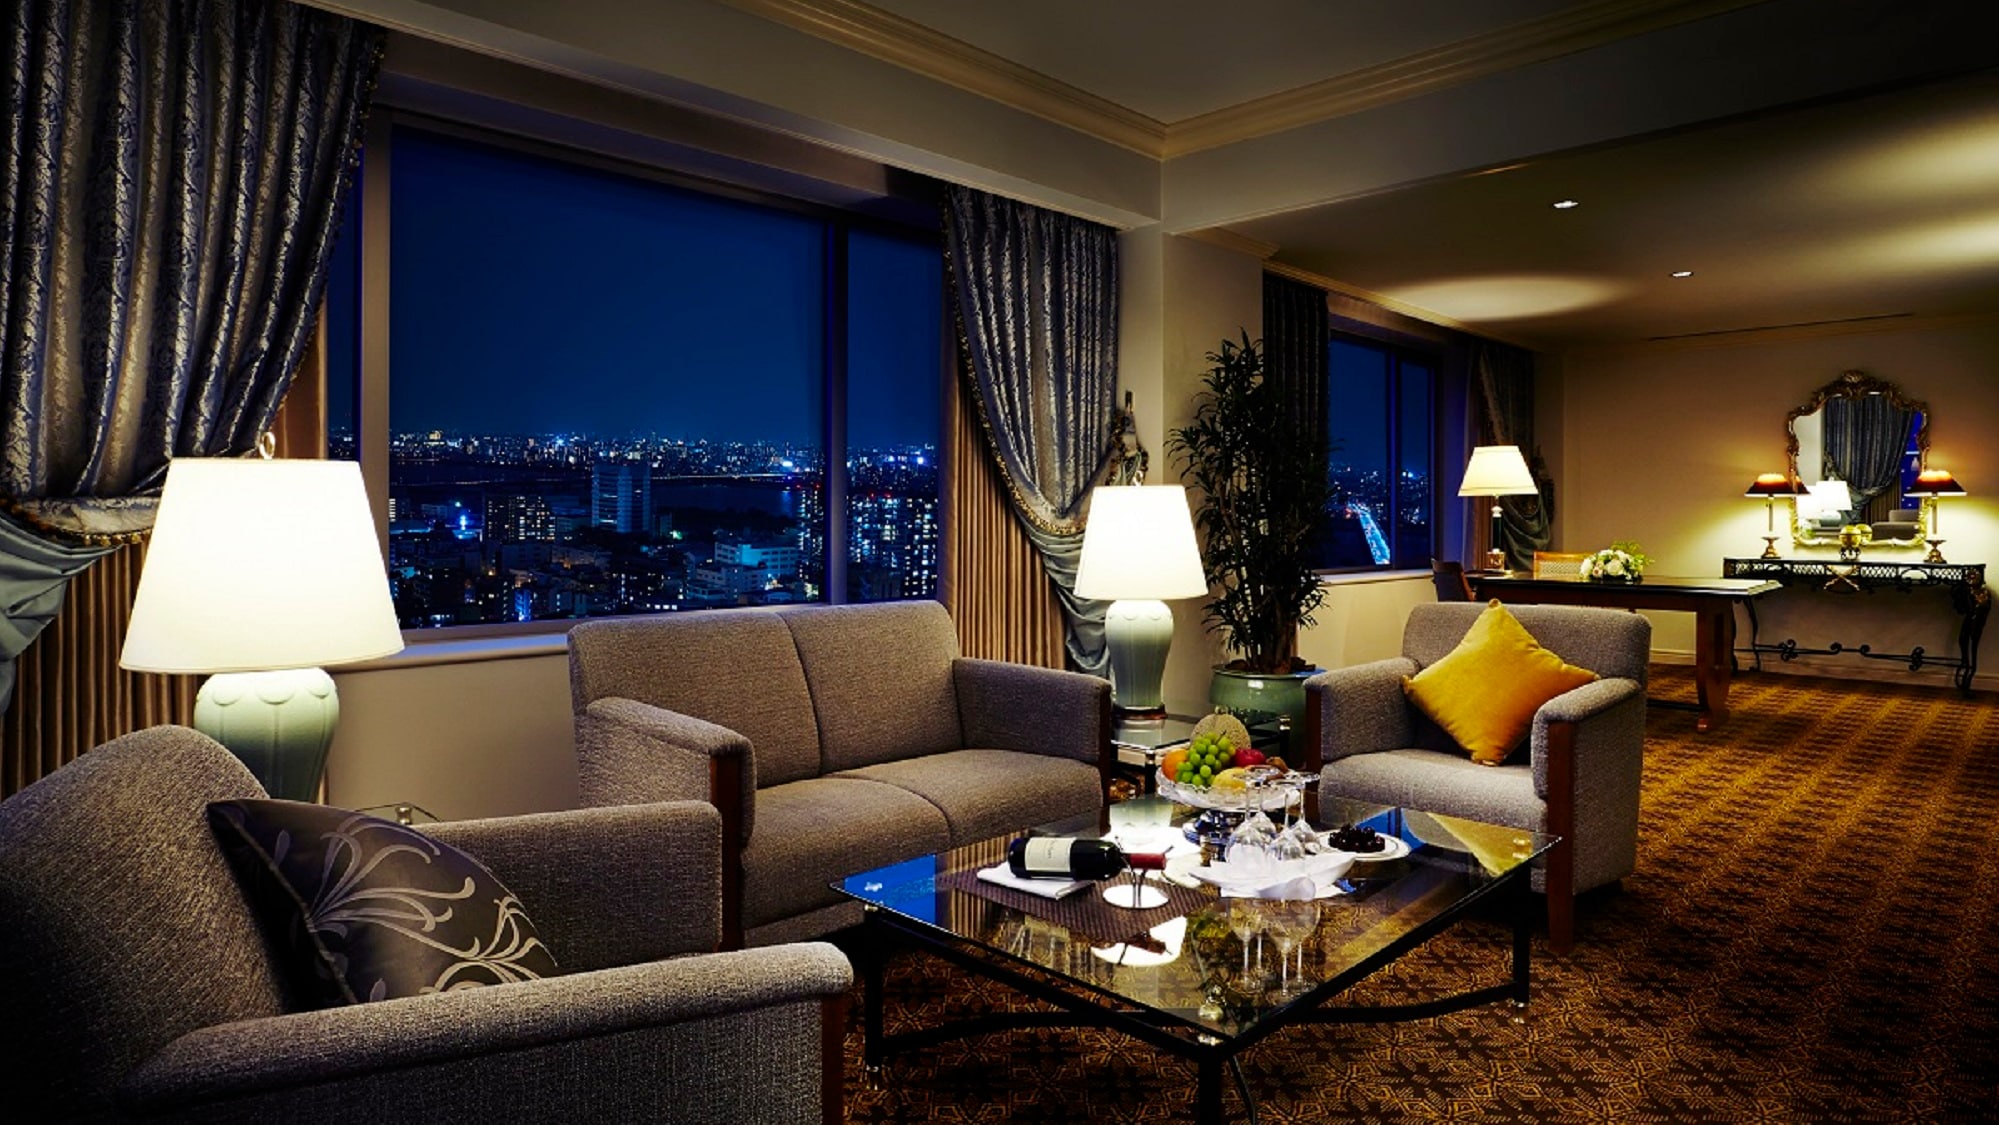 Executive suite living room (example)